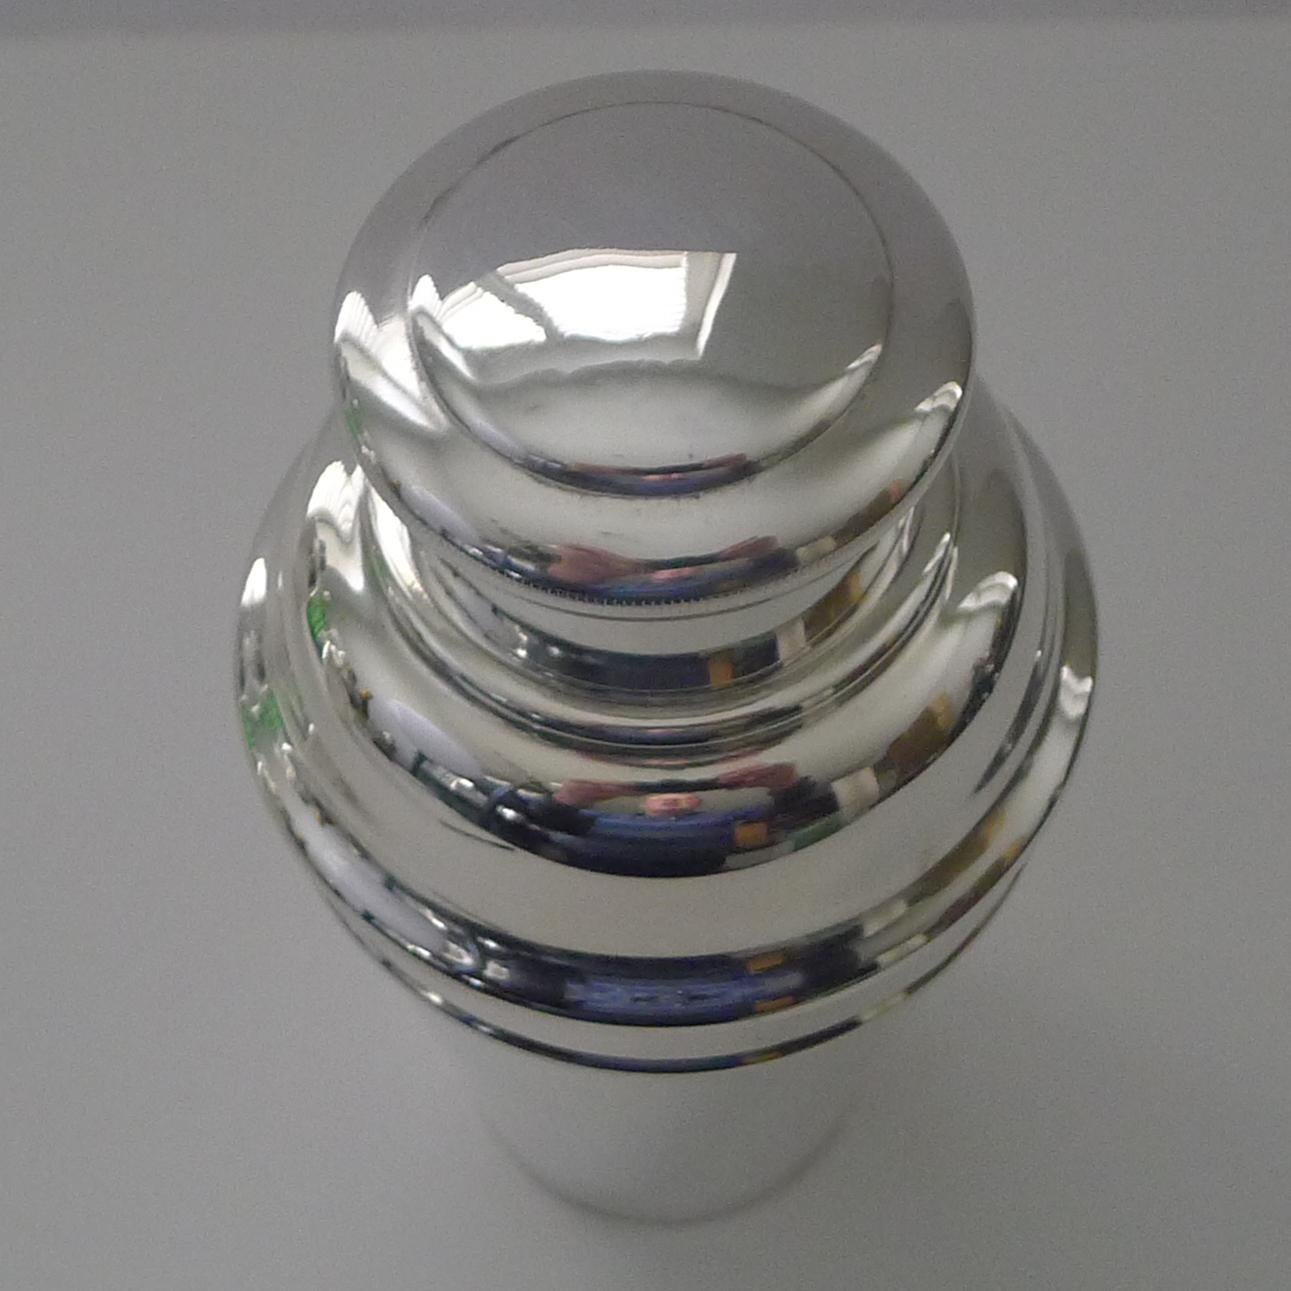 Silver Plate English Art Deco Cocktail Shaker by William Suckling Ltd. C.1930